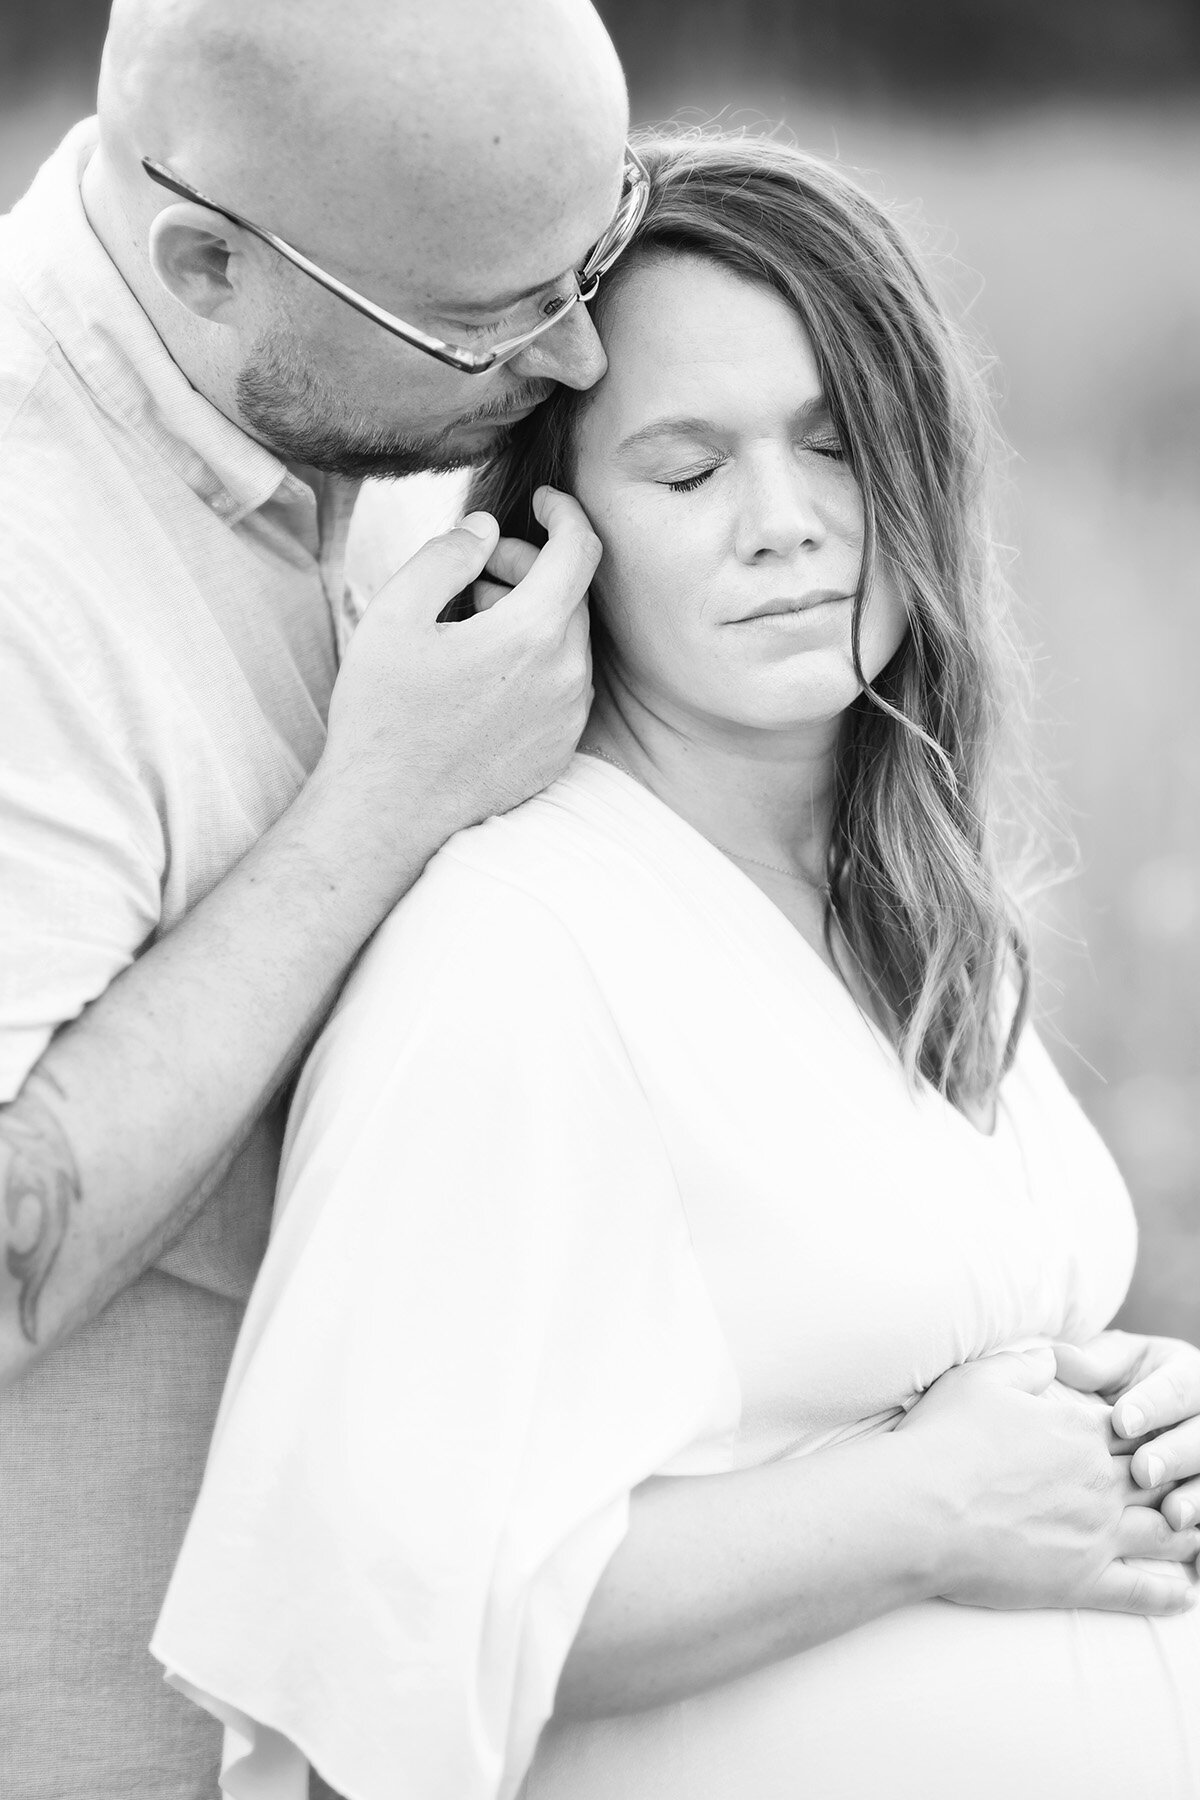 Louisville Pregnancy Photographer | Julie Brock Photography | Maternity Photoshoot outdoors | Newborn Photographer | Family Photographer | Couple Photo session for baby.jpg